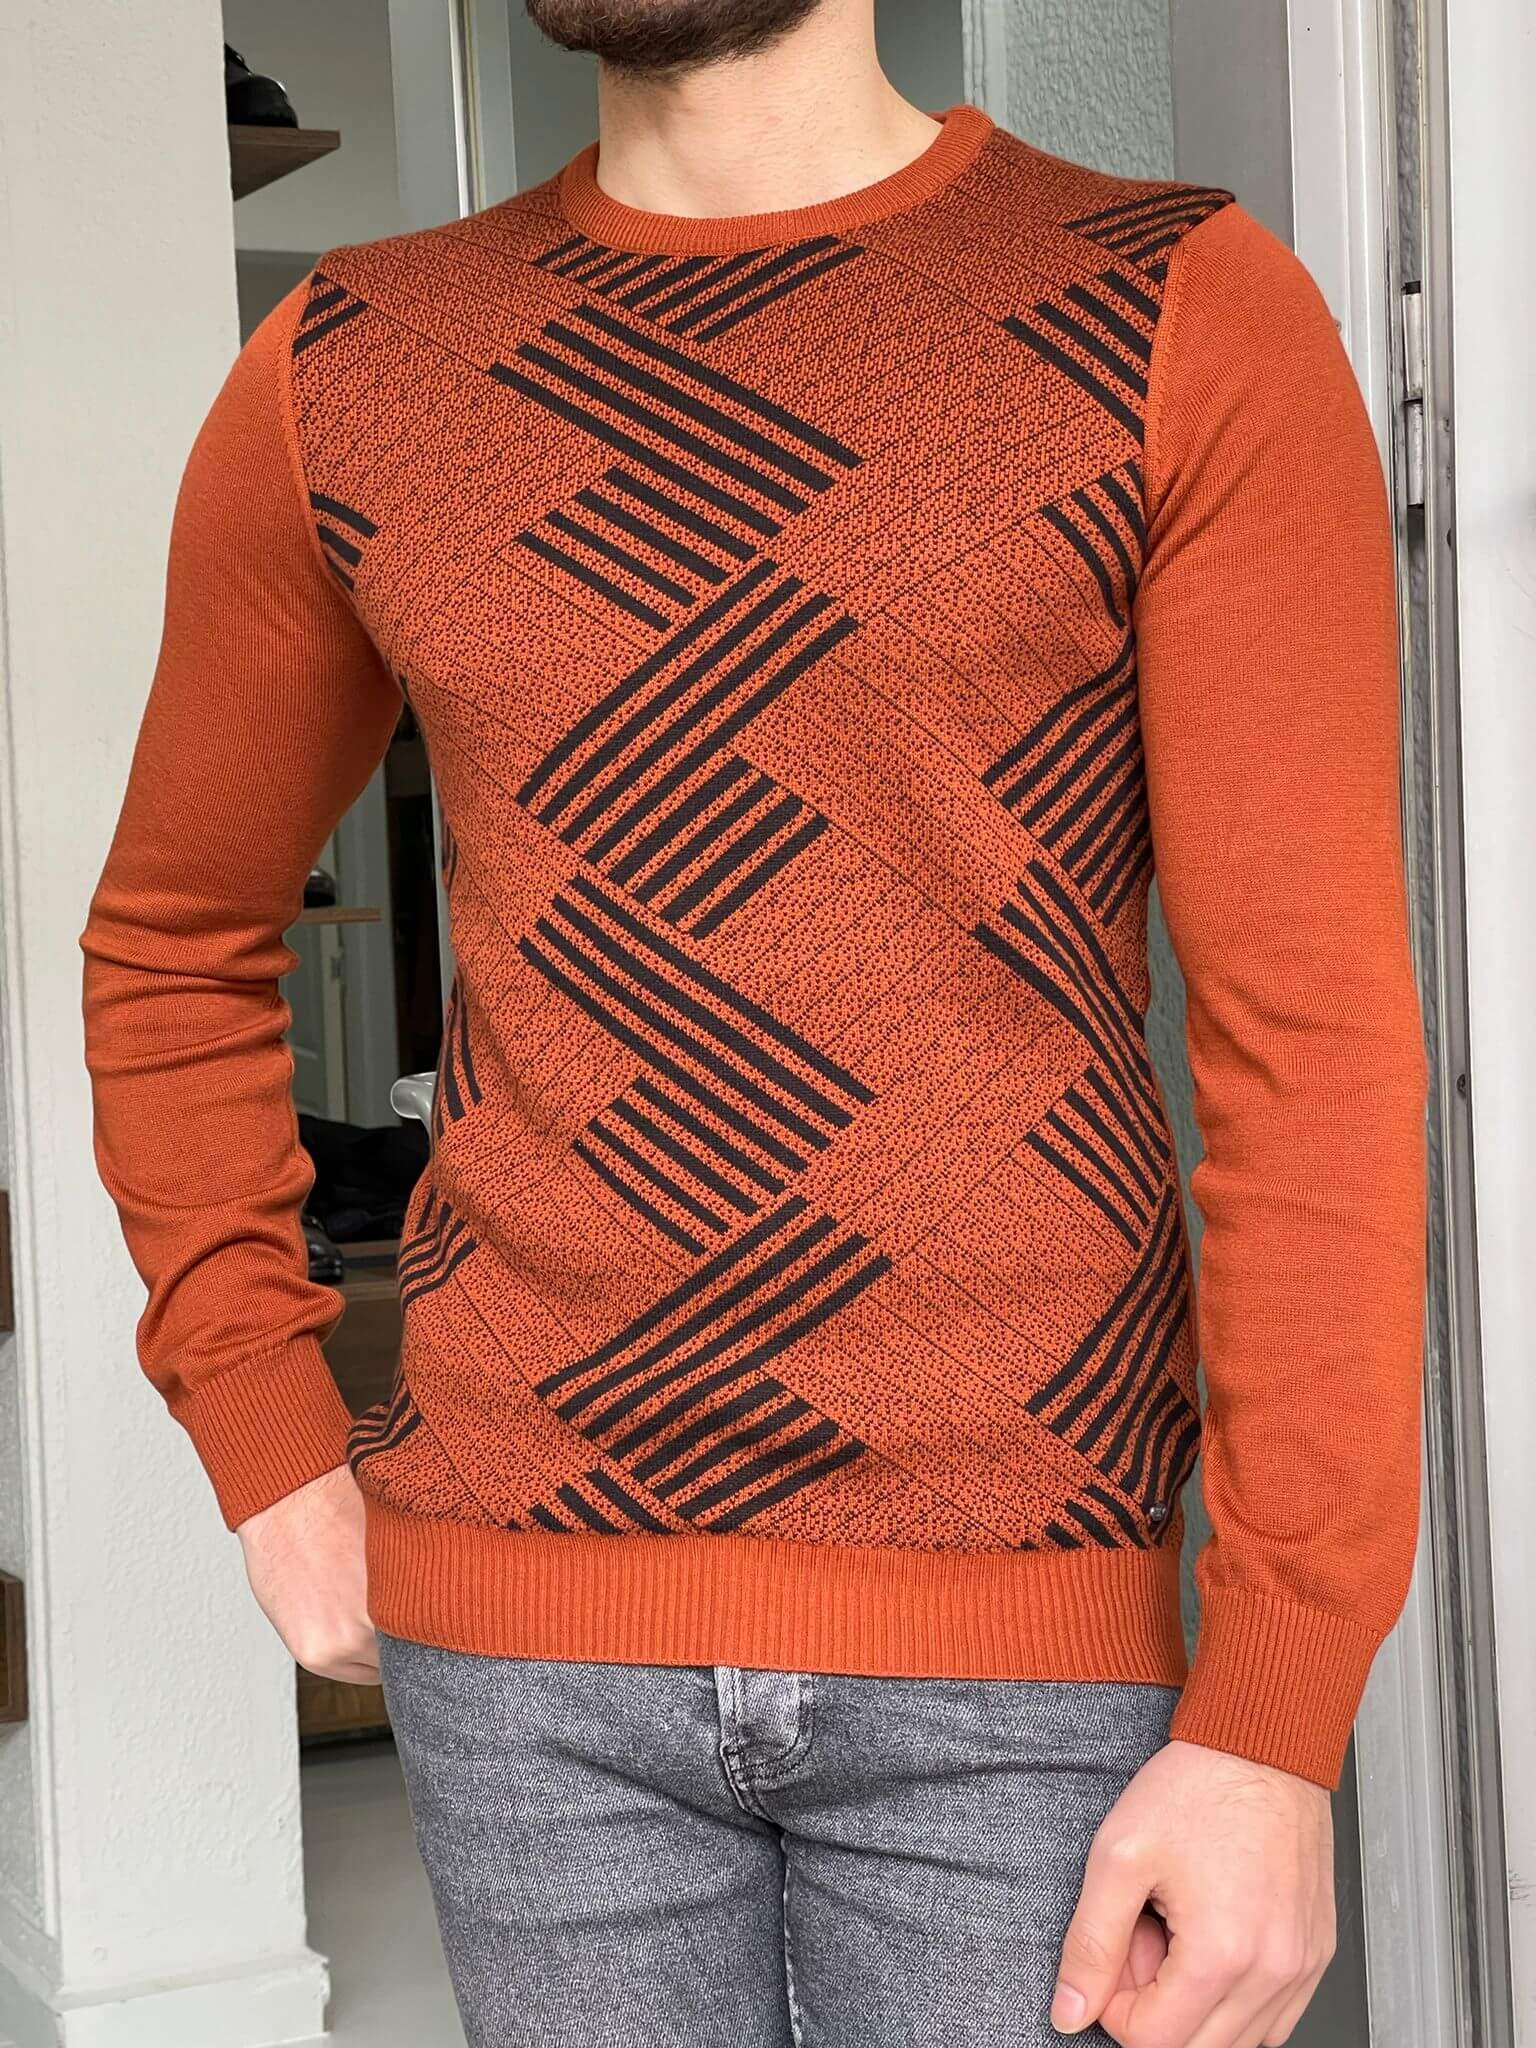 A crewneck sweater with a striking patterned tile design, combining vibrant colors and geometric shapes."